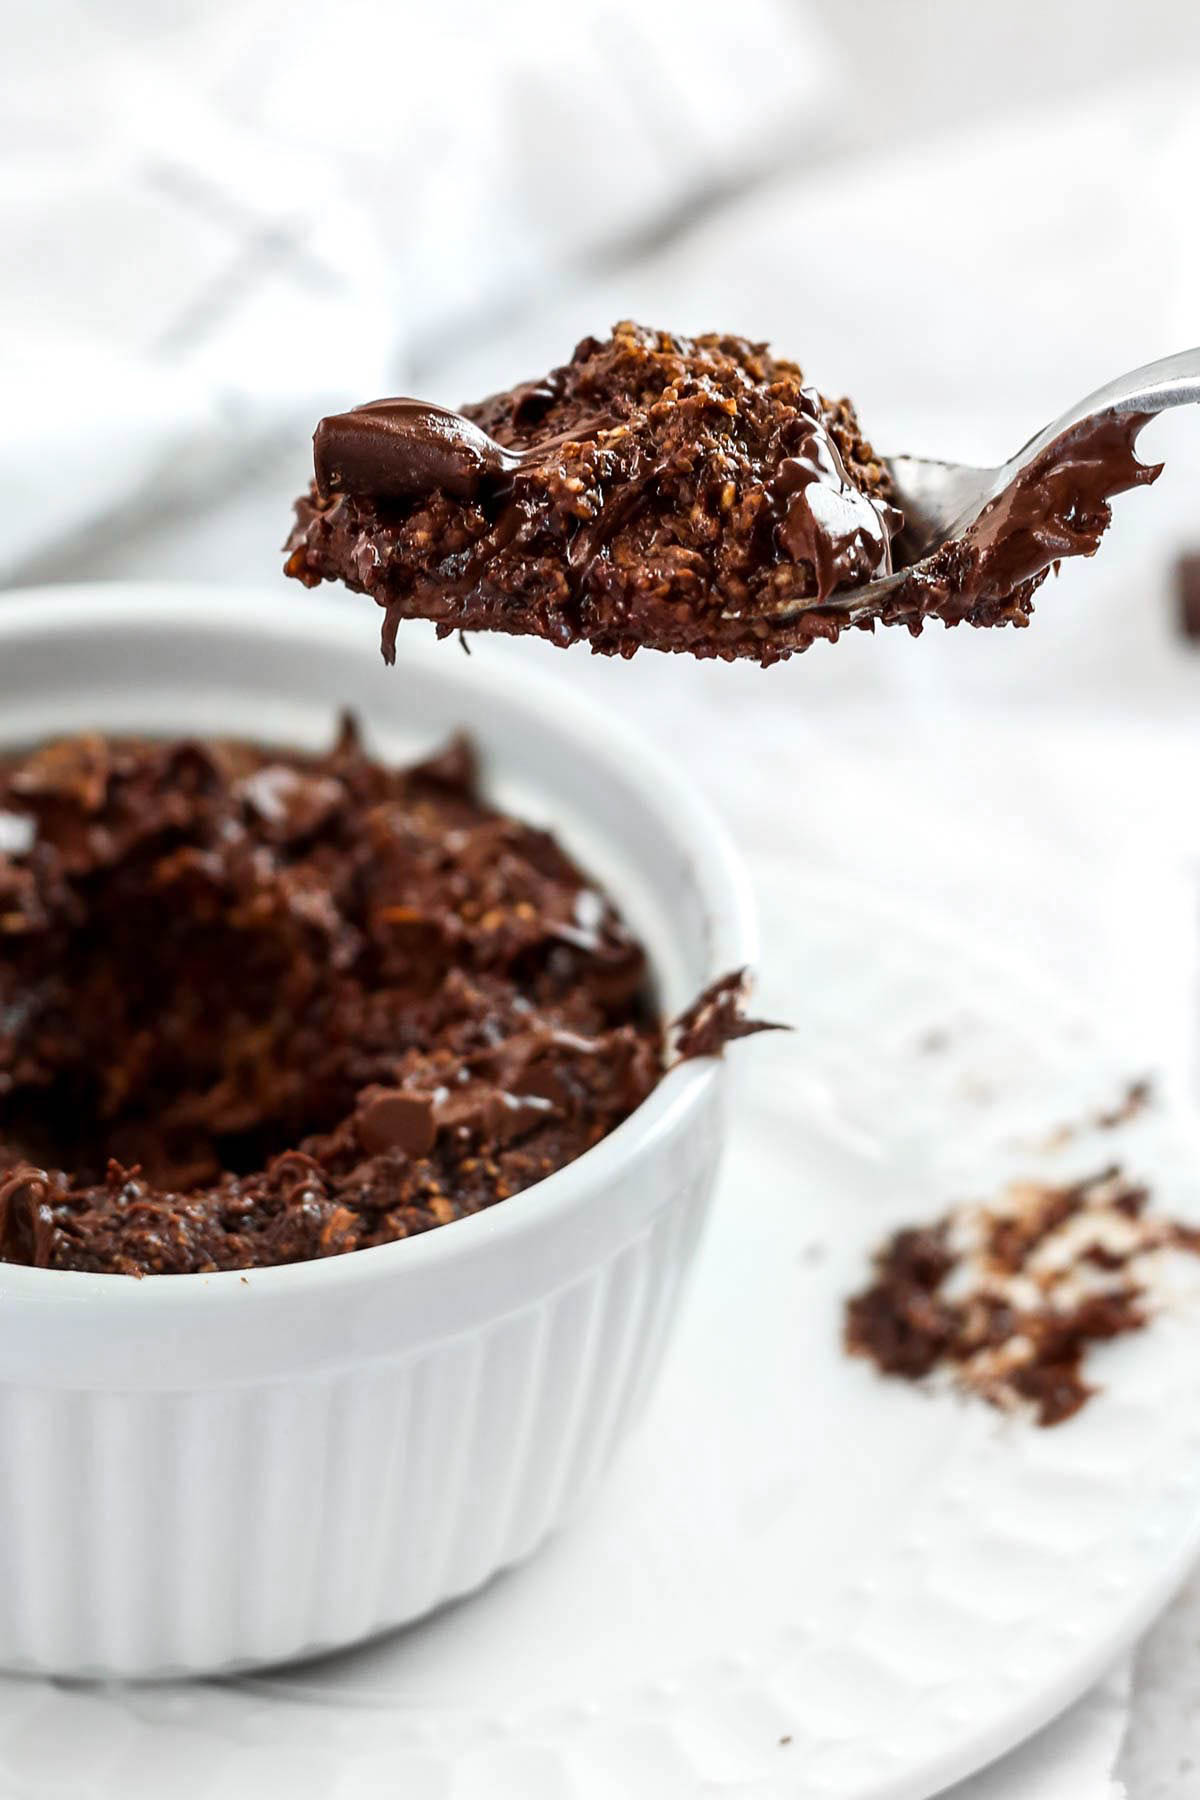 a spoonful of chocolate baked oats with melted chocolate on top.